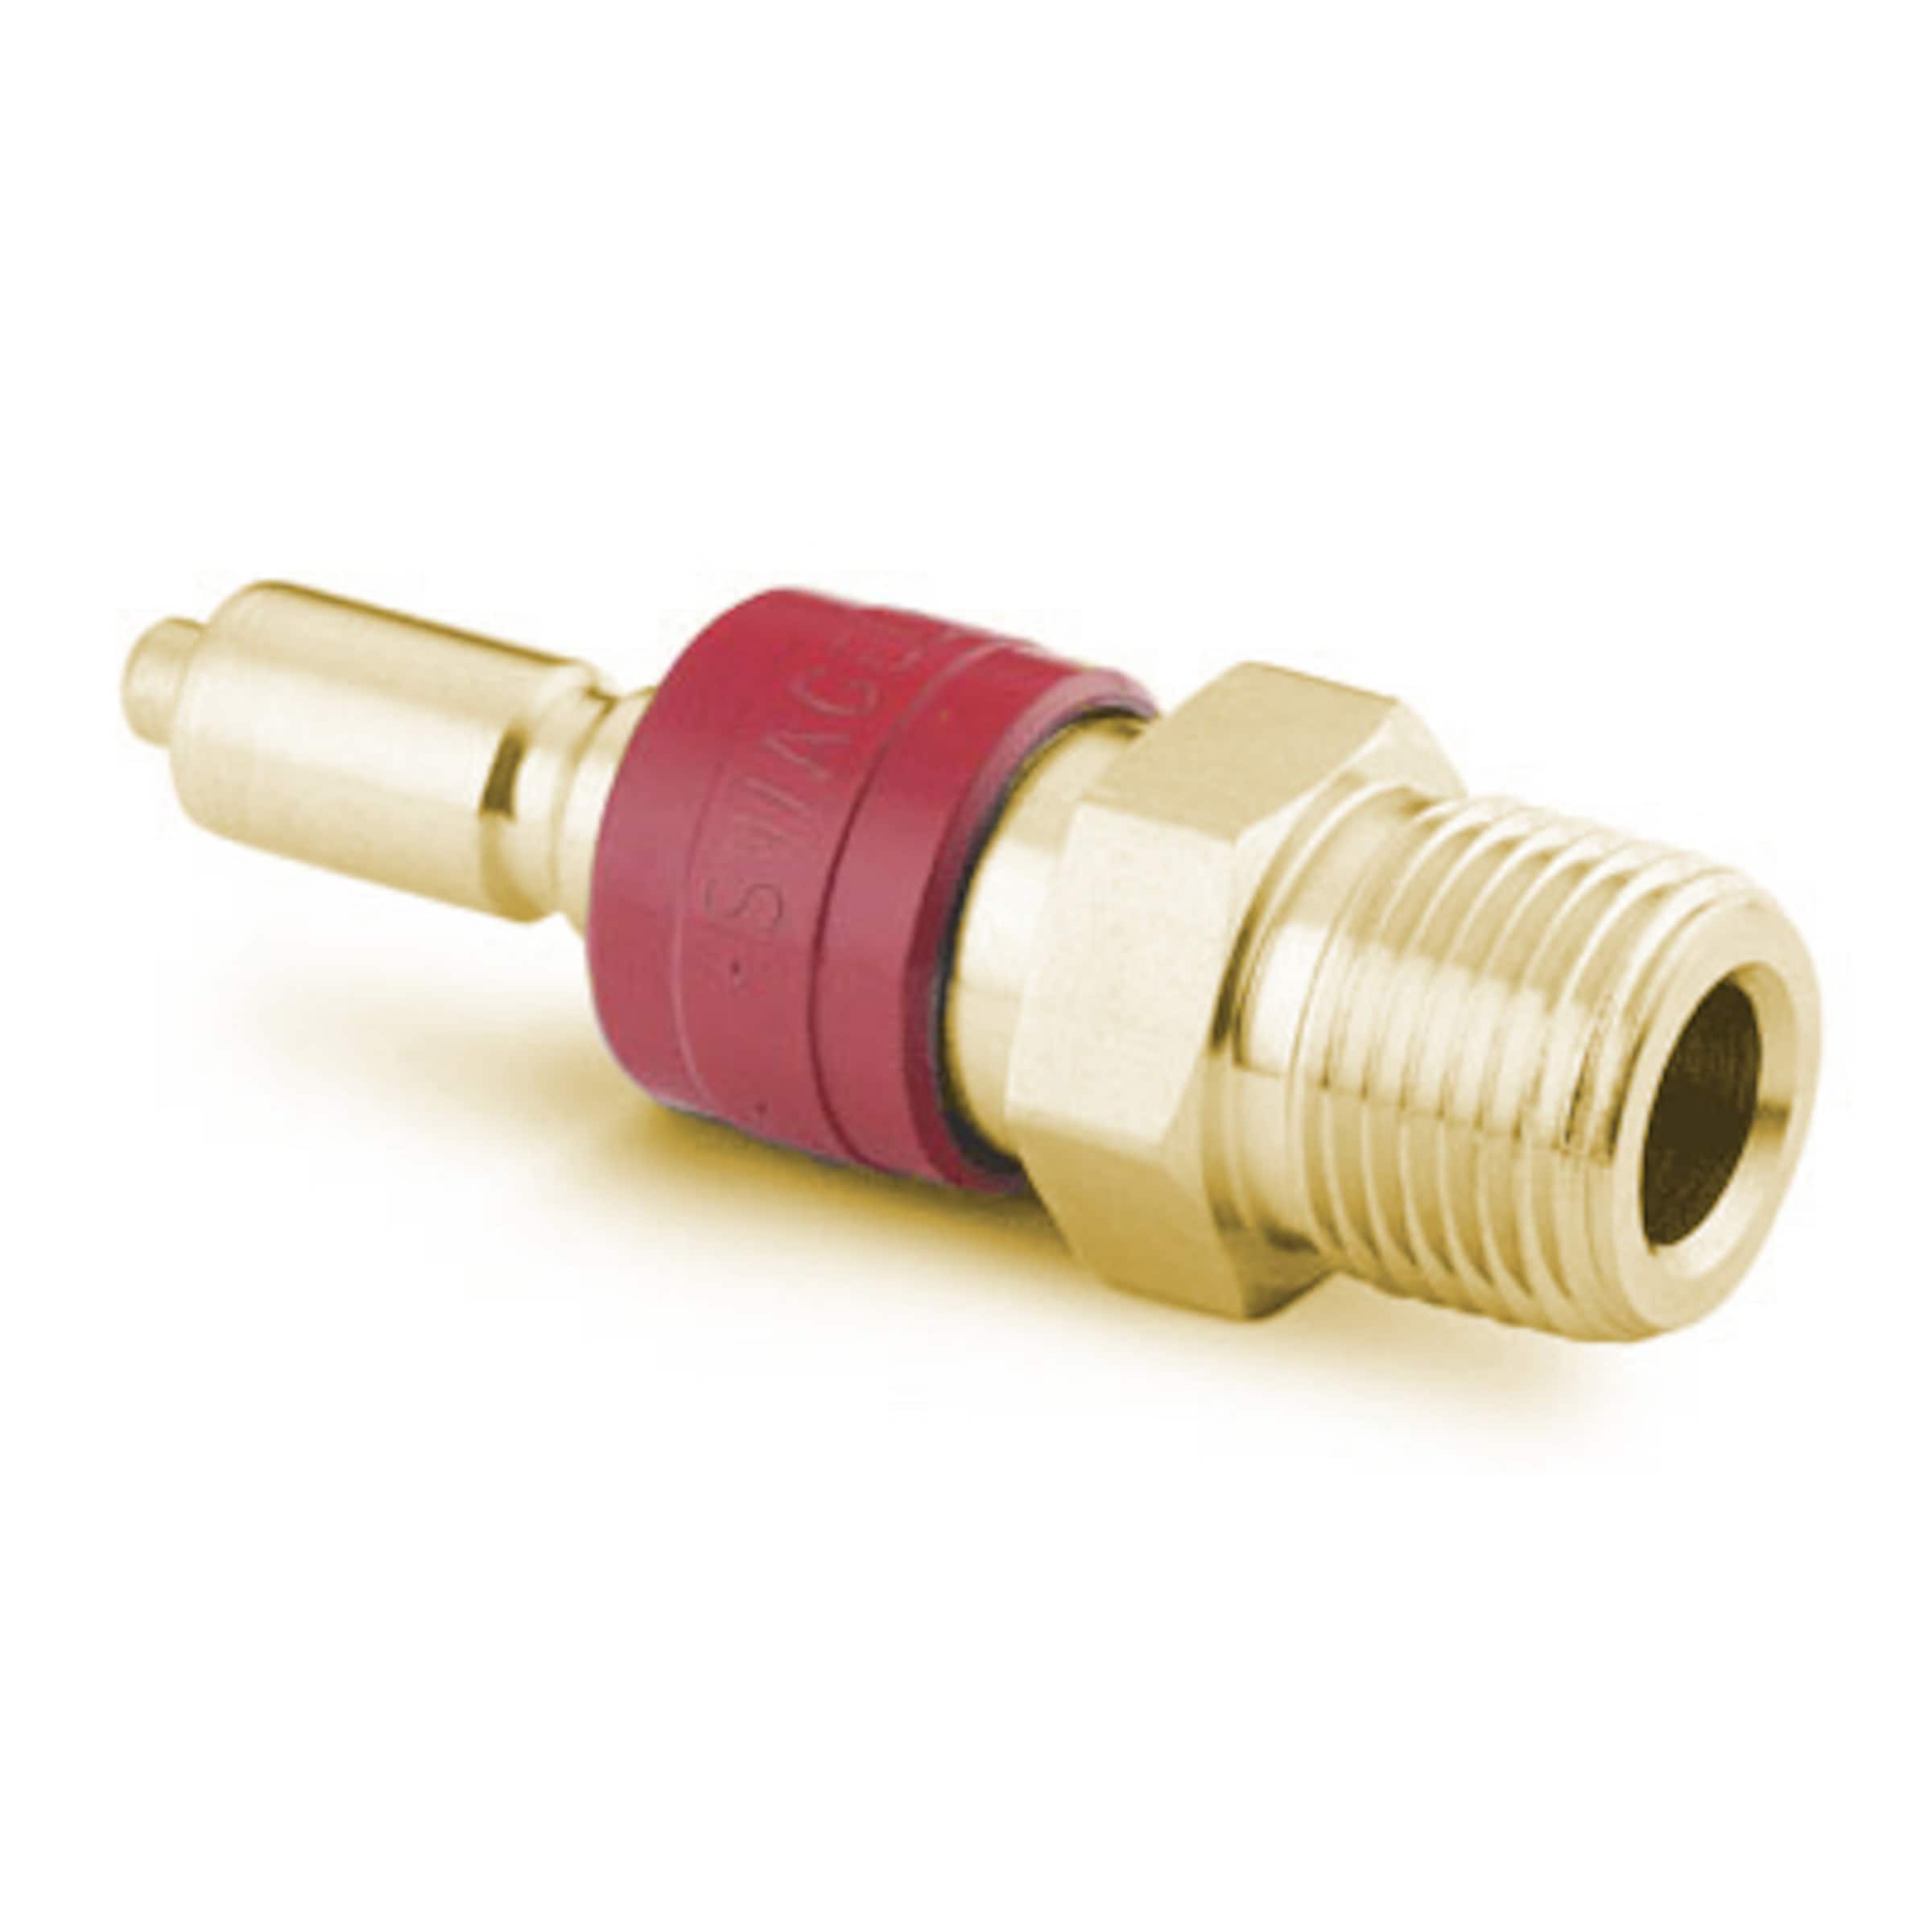 Brass Instrumentation Quick Connect Stem with Valve, 1/4 in. Male NPT (QC6  Series), Instrumentation Quick Connects, Quick Connects, Valves, All  Products